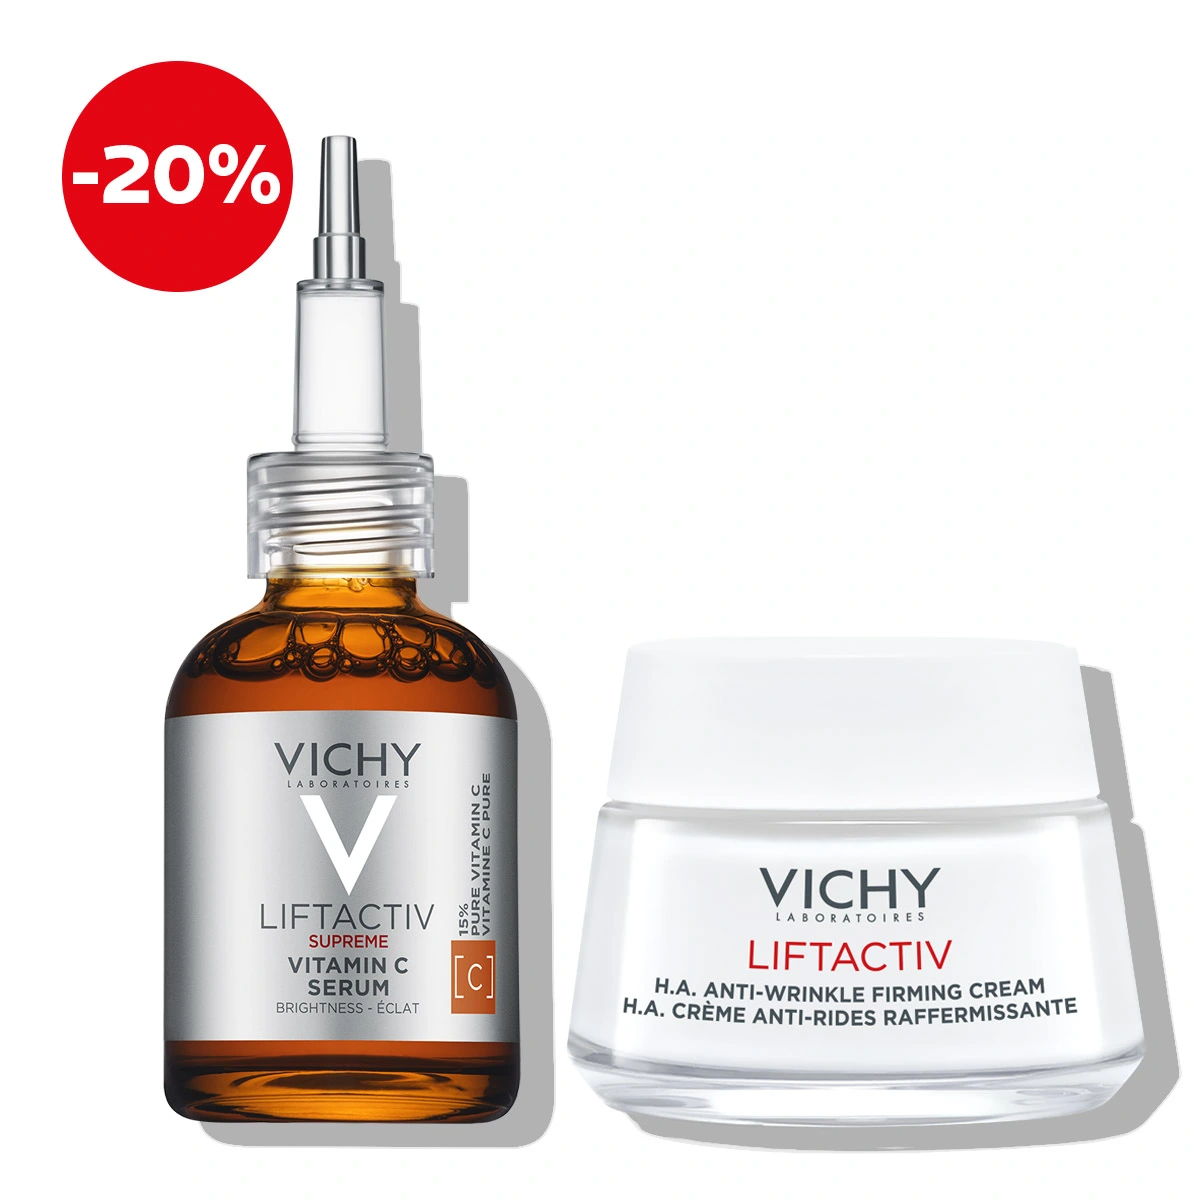 Vichy LIFTACTIV Protocol for brighter and healthier skin without wrinkles (2)